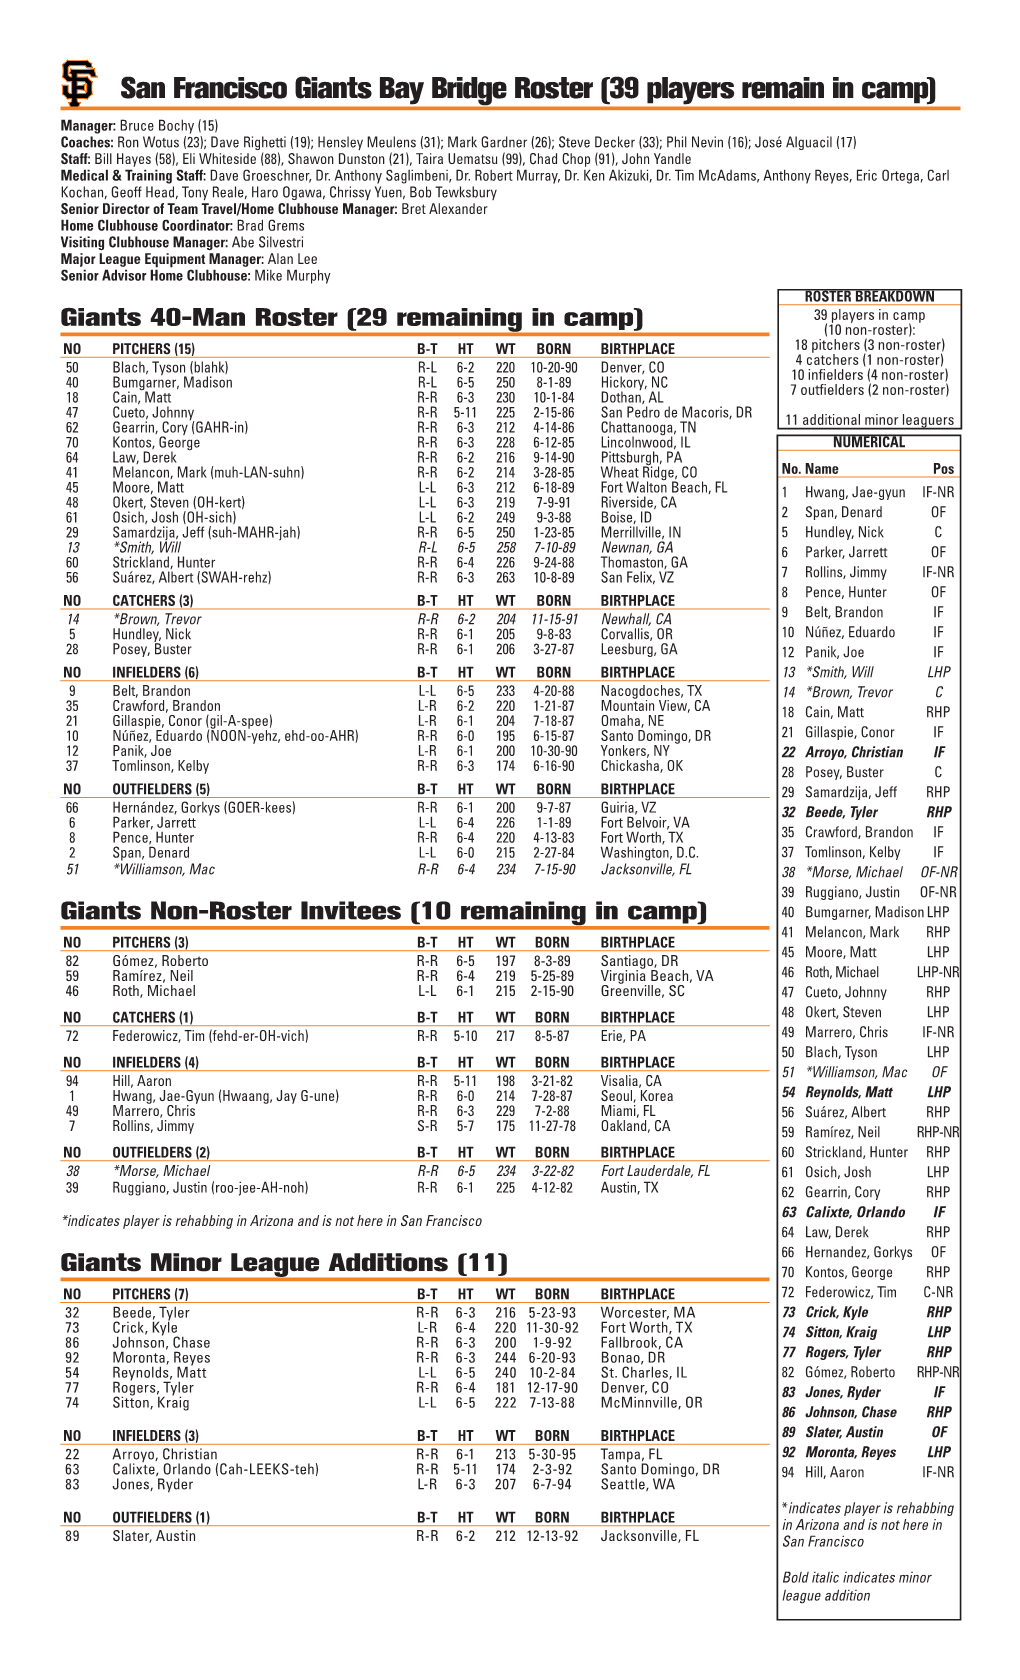 San Francisco Giants Bay Bridge Roster (39 Players Remain in Camp)